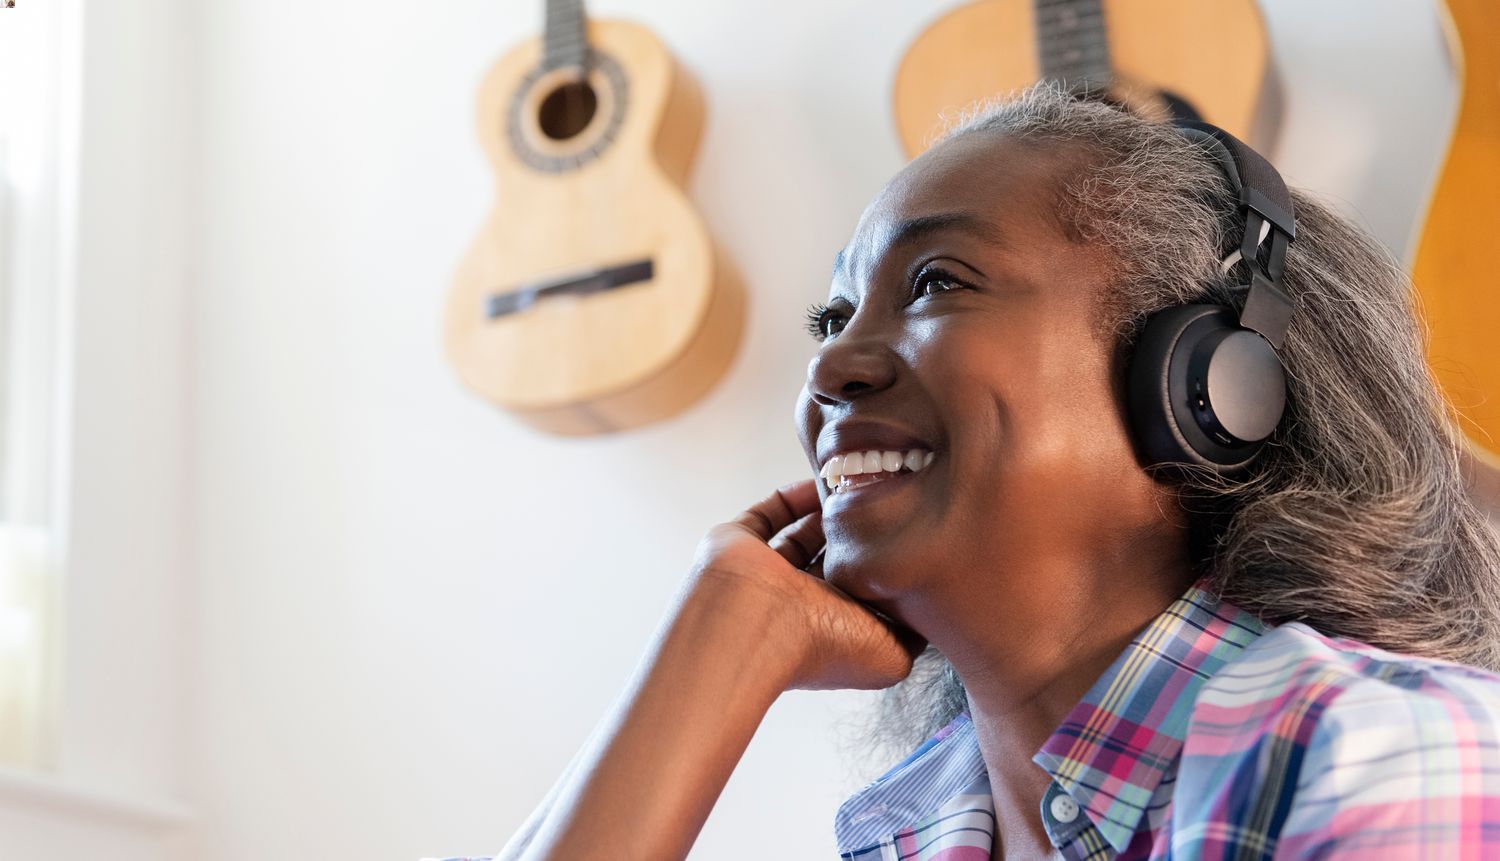 How Does Music Therapy Affect The Brain